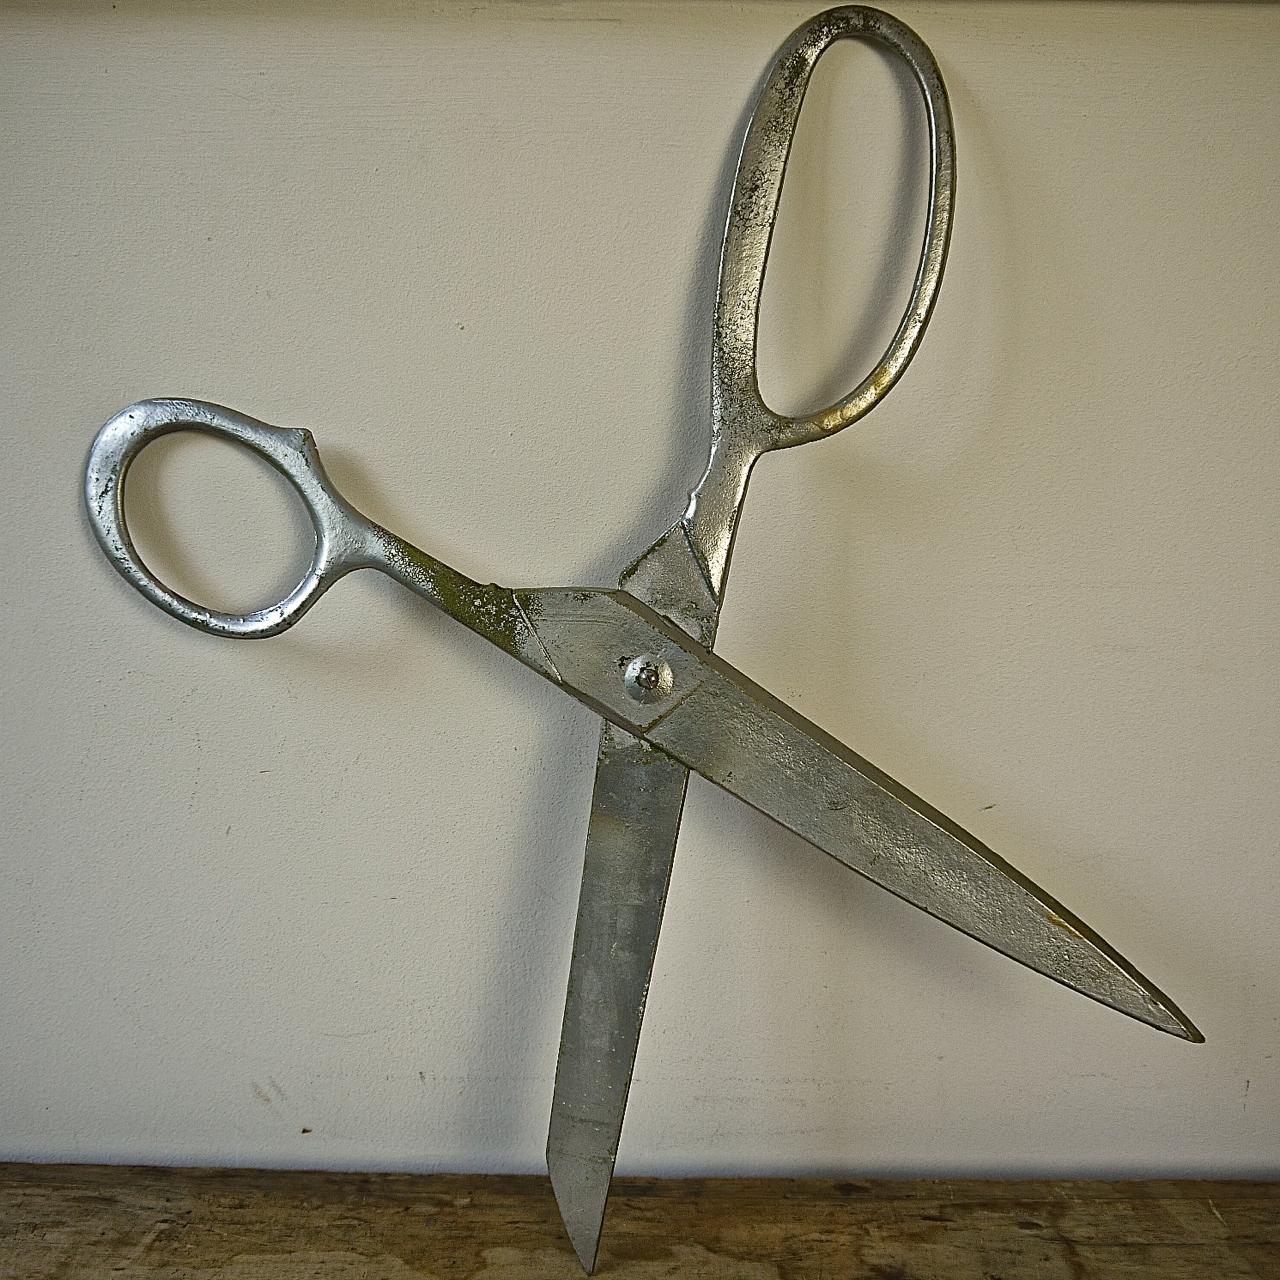 Pair of French light metal scissors once used as a shop sign. They are painted with a silver paint that shows signs of some wear and tear from having been outdoors. With charm and a quirkiness.